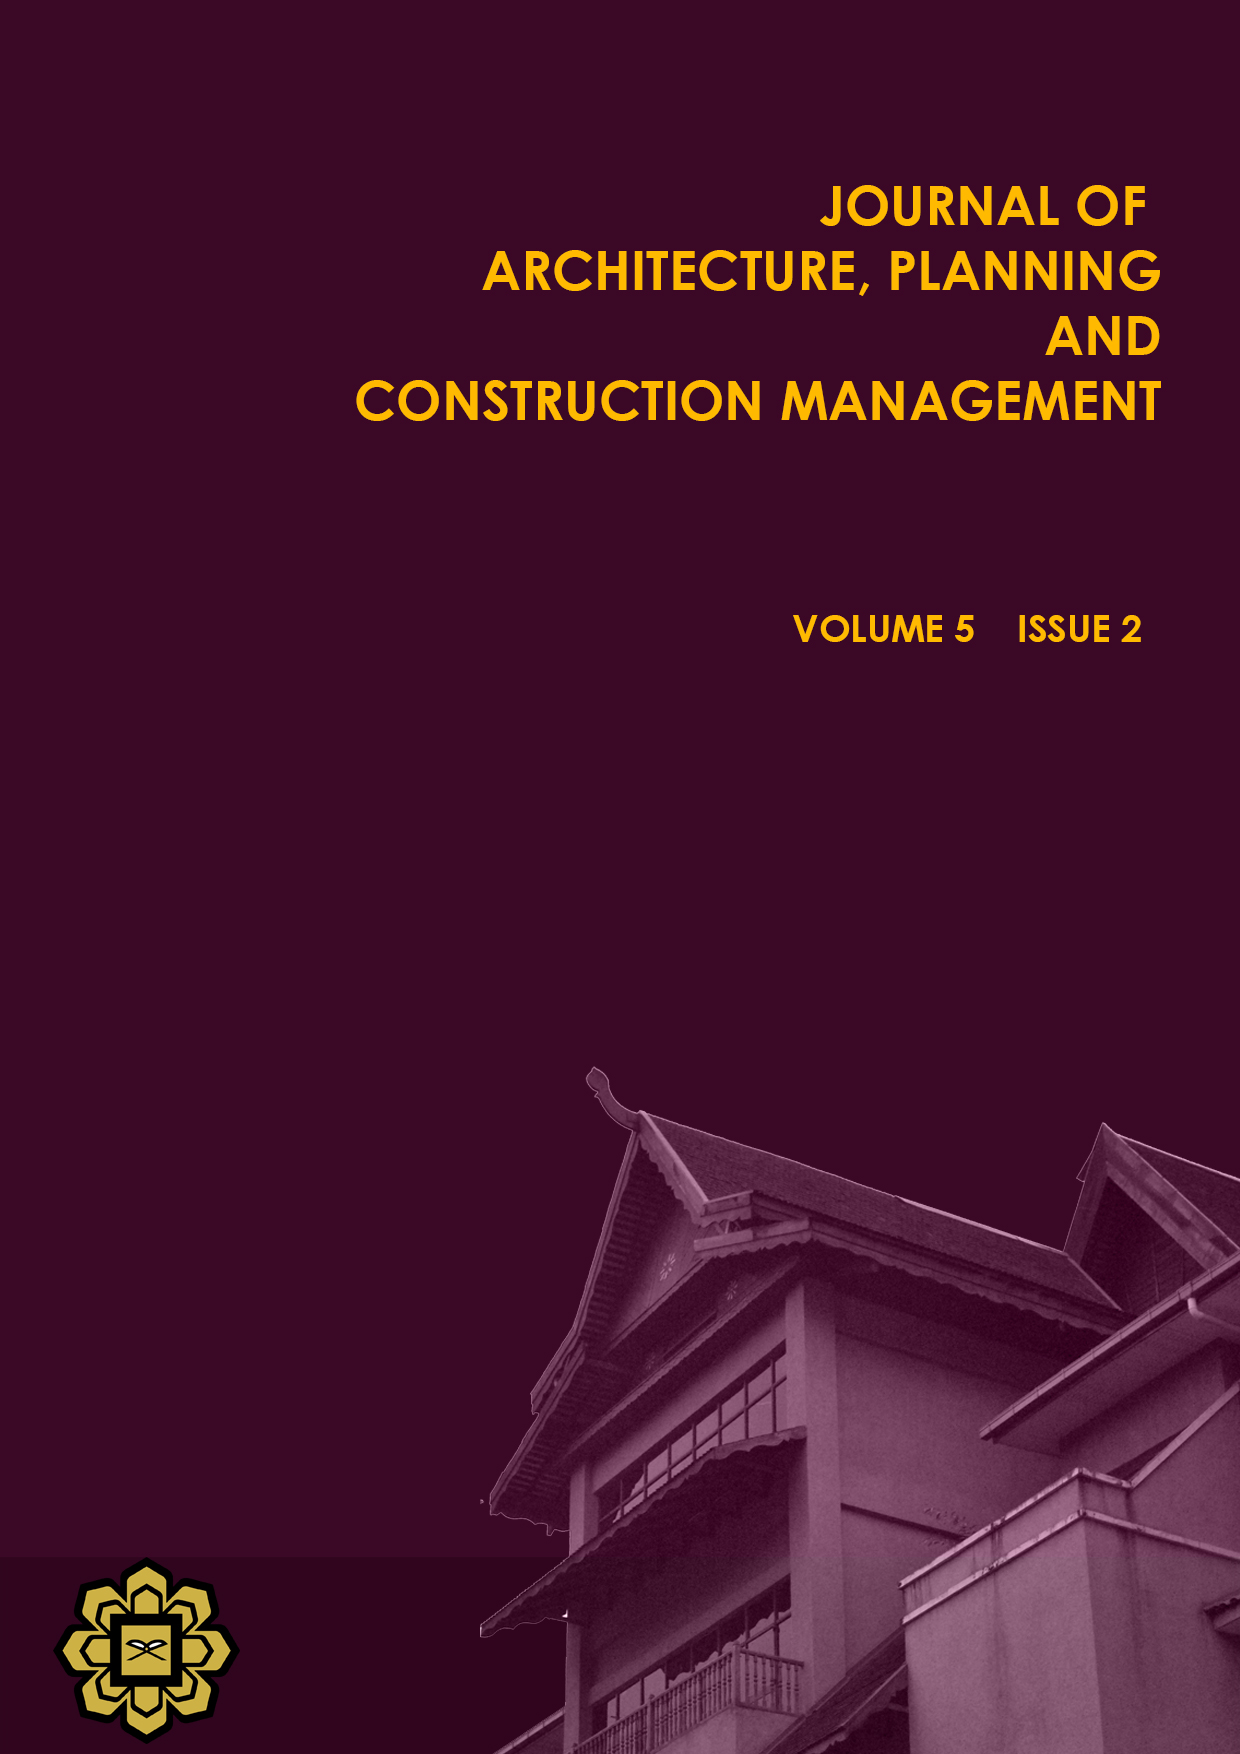 					View Vol. 5 No. 2 (2015): Journal of Architecture, Planning and Construction Management (JAPCM)
				